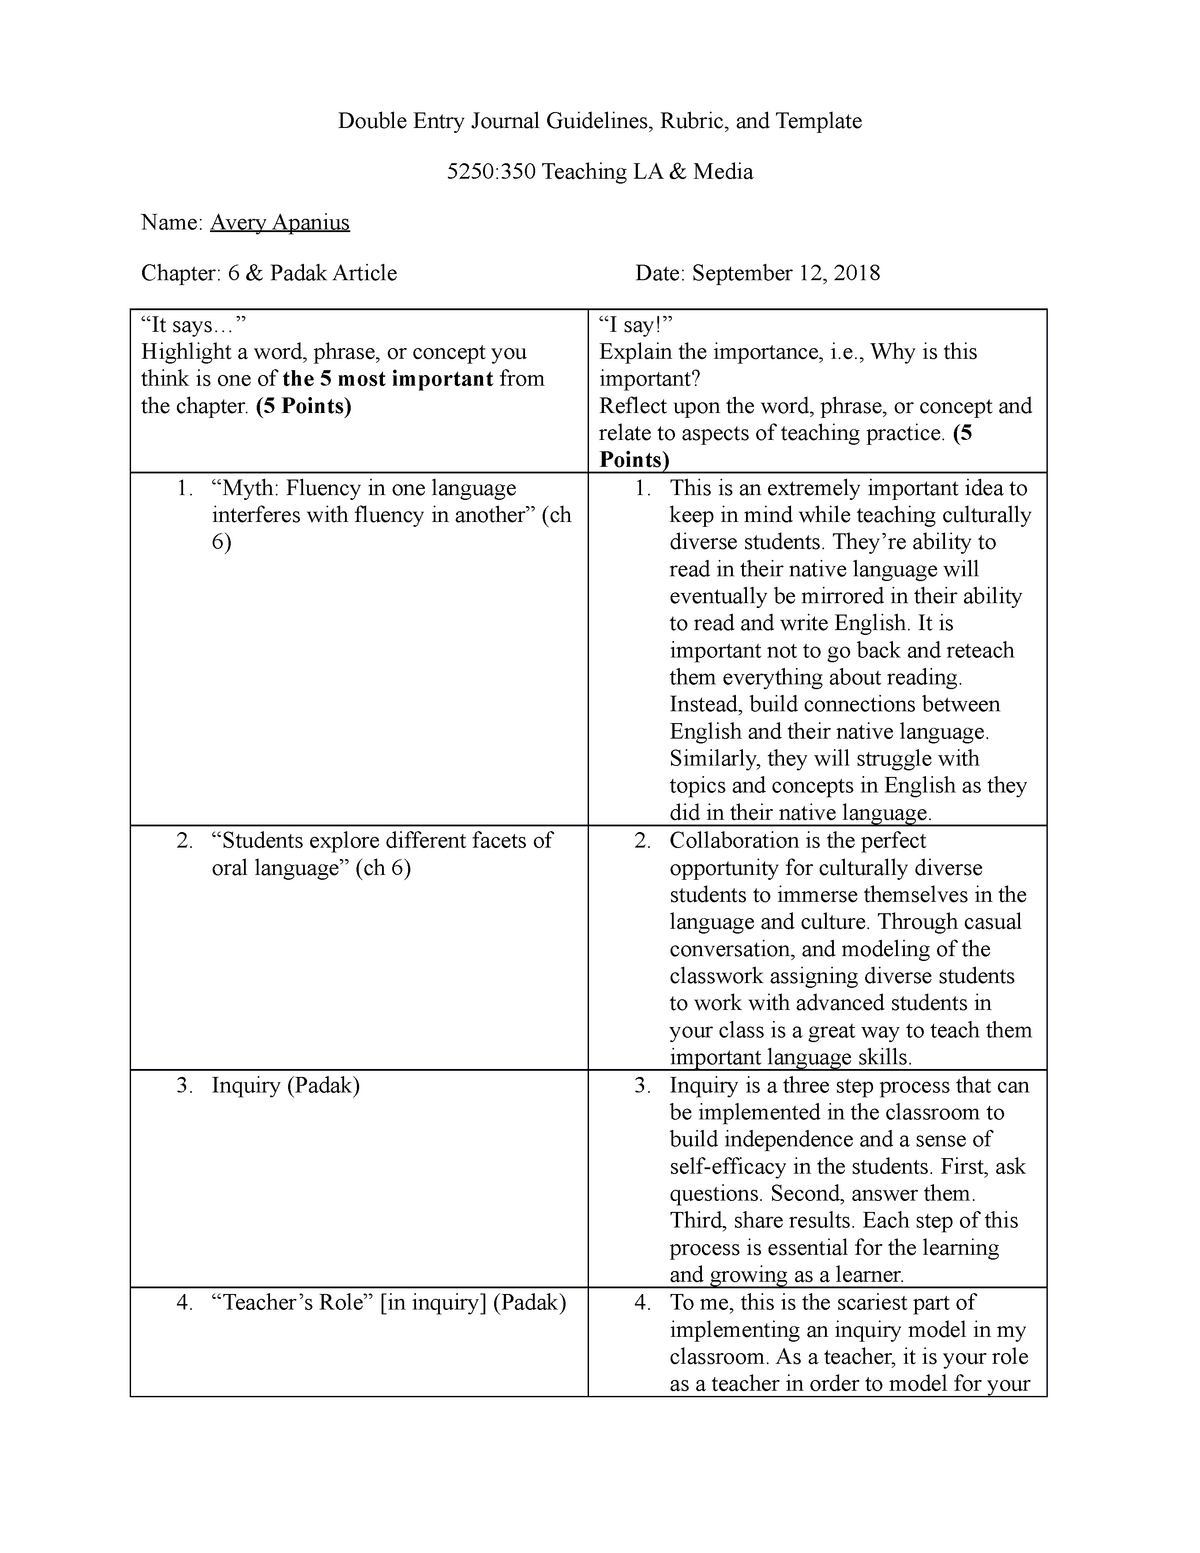 Double Entry Journal (ch23 and Padak Article) - Double Entry In Double Entry Journal Template For Word